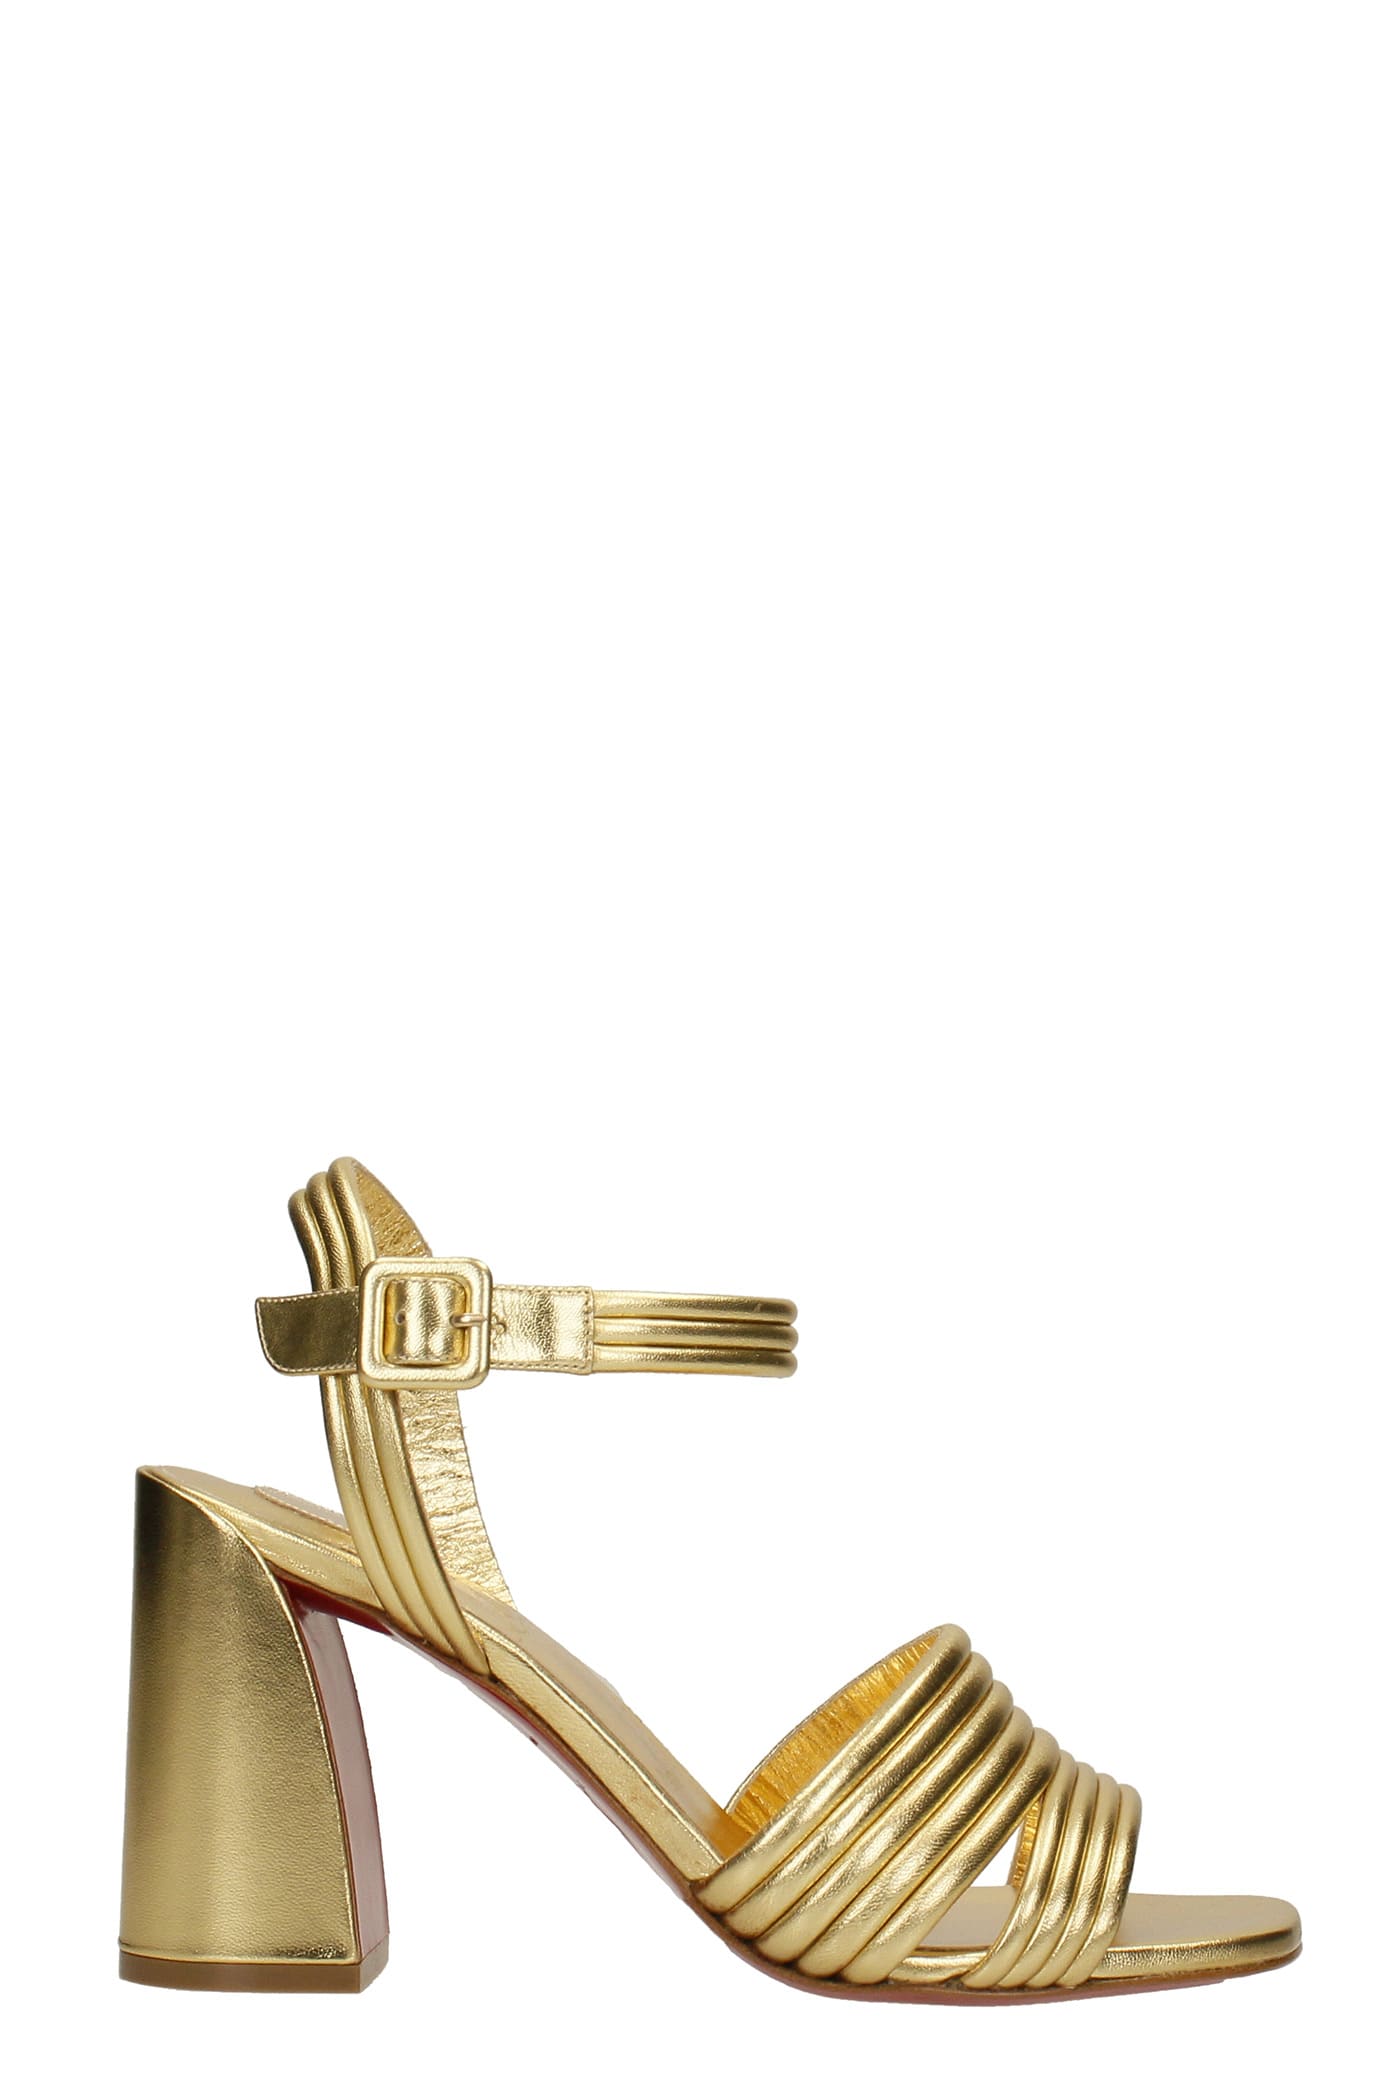 Christian Louboutin Manola 85 Sandals In Gold Leather